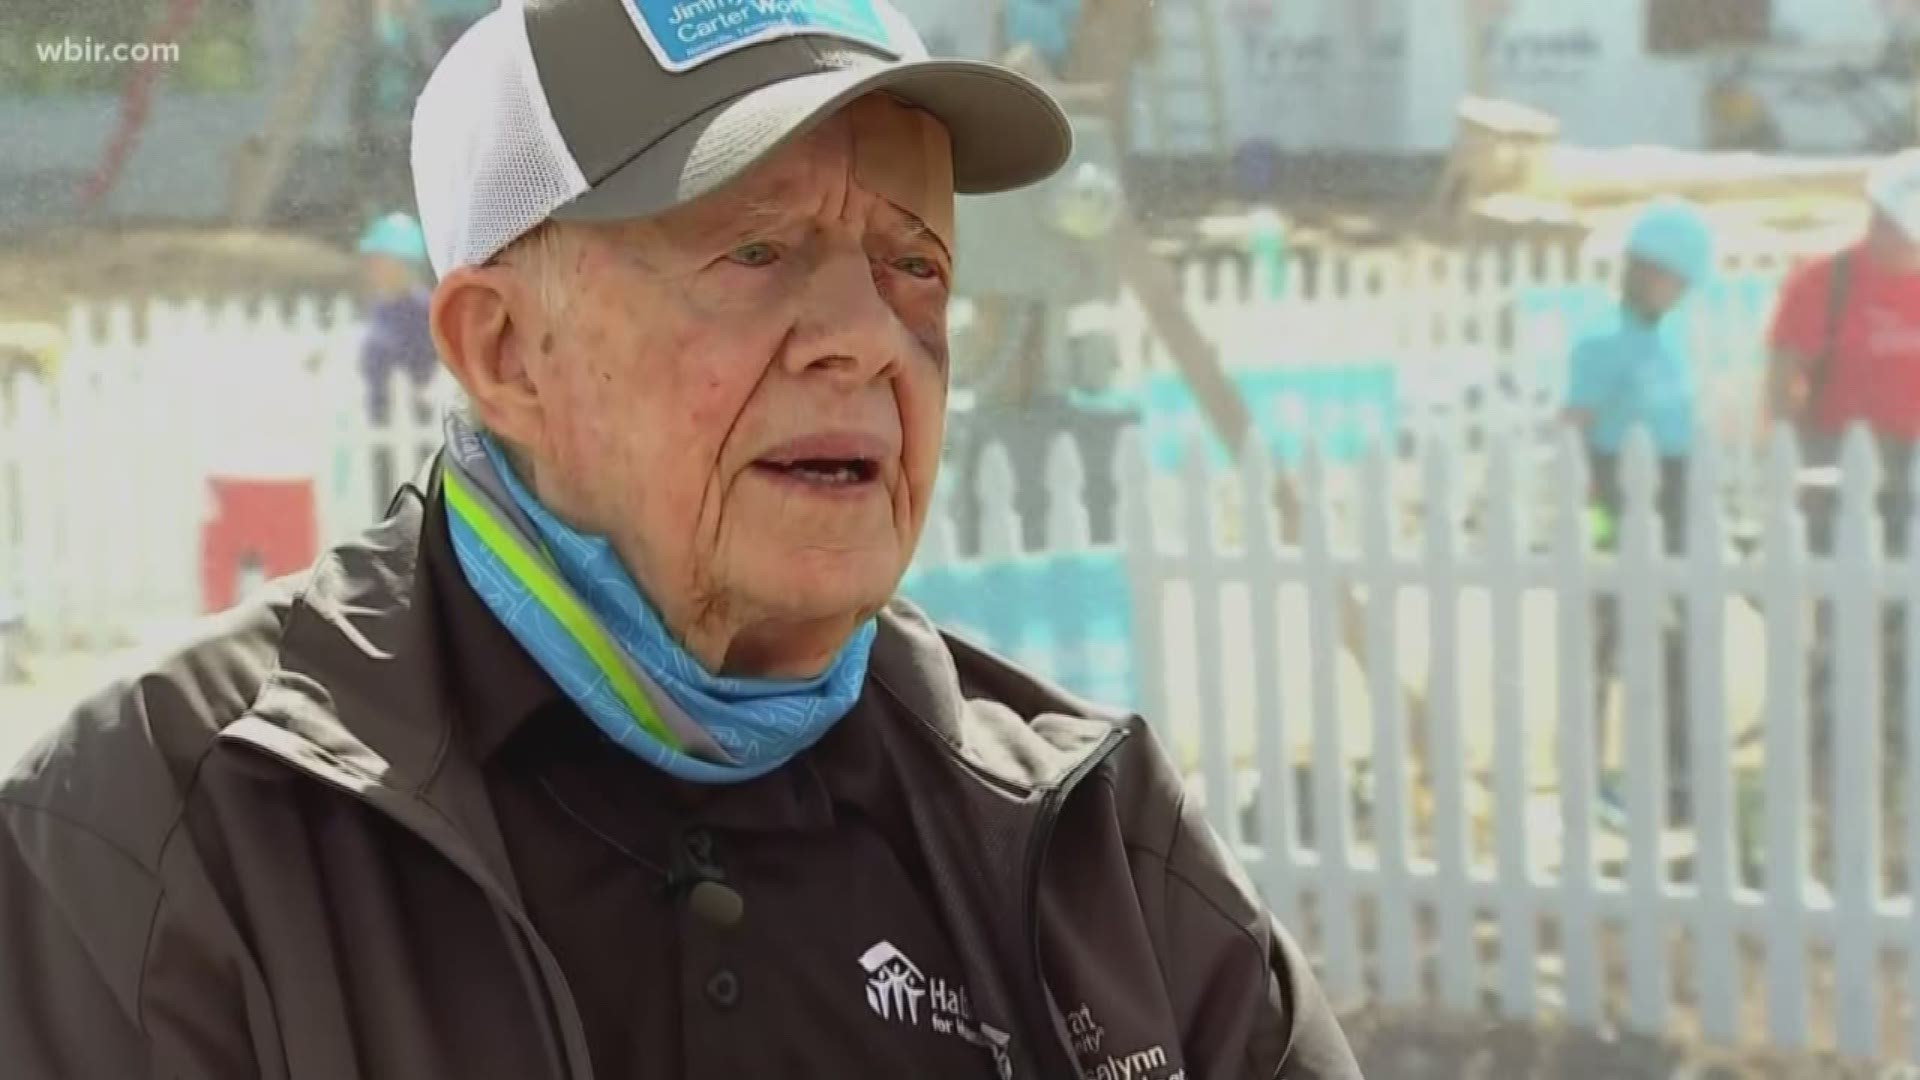 Former President Jimmy Carter is in Middle Tennessee helping build homes with Habitat for Humanity.